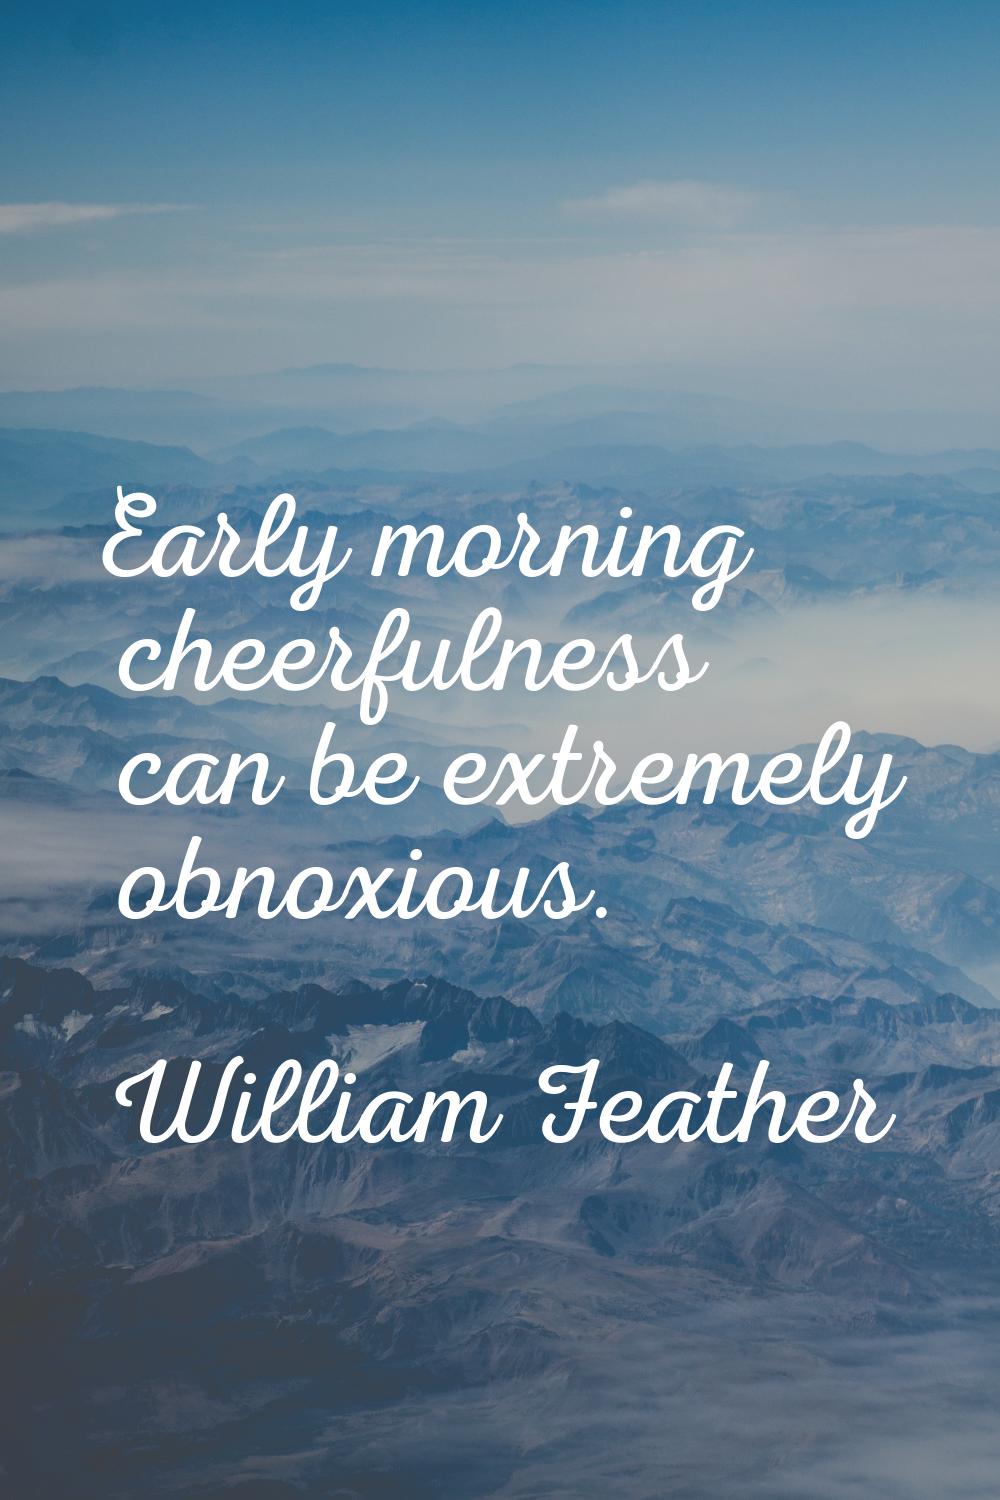 Early morning cheerfulness can be extremely obnoxious.